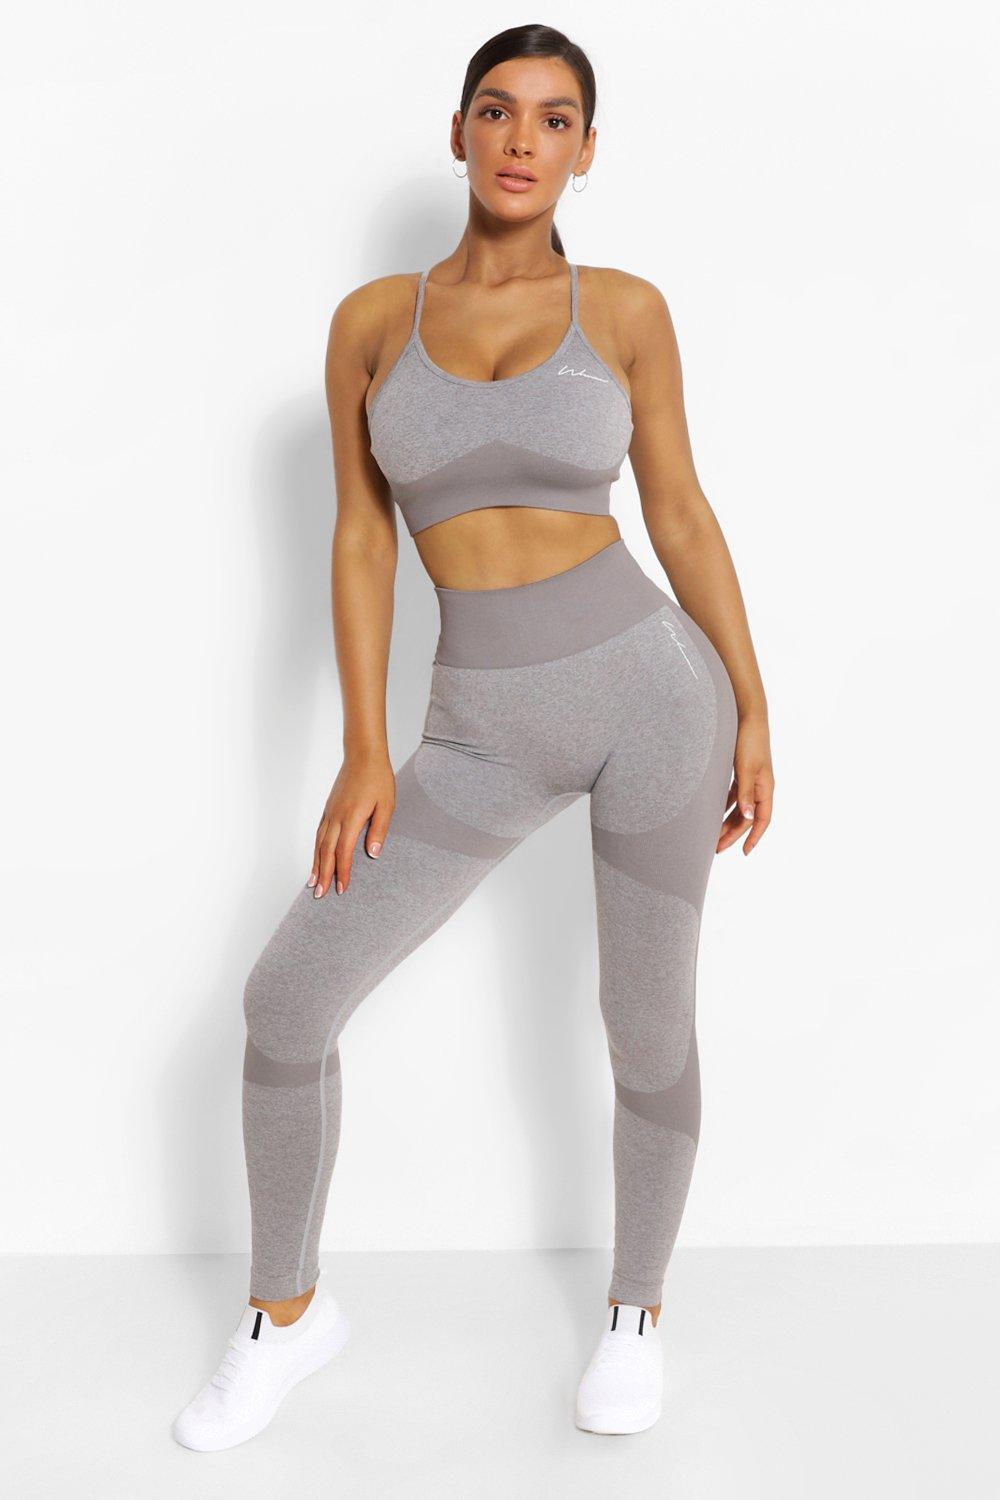 Boohoo Womens Fit Seamless Contrast Workout Leggings Athletic